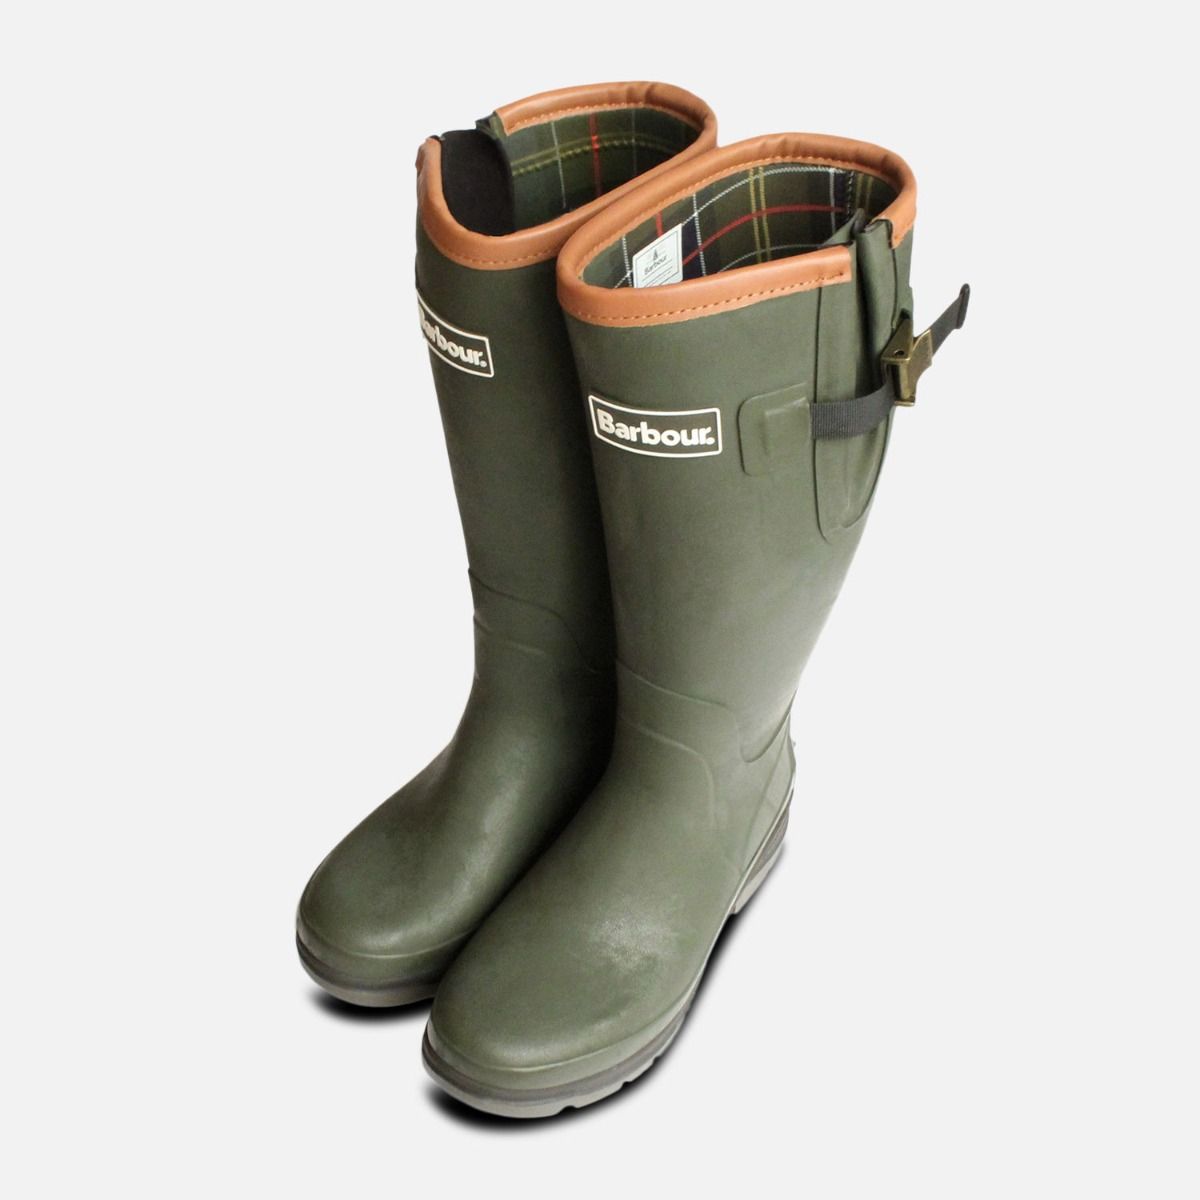 barbour wellies mens size 9